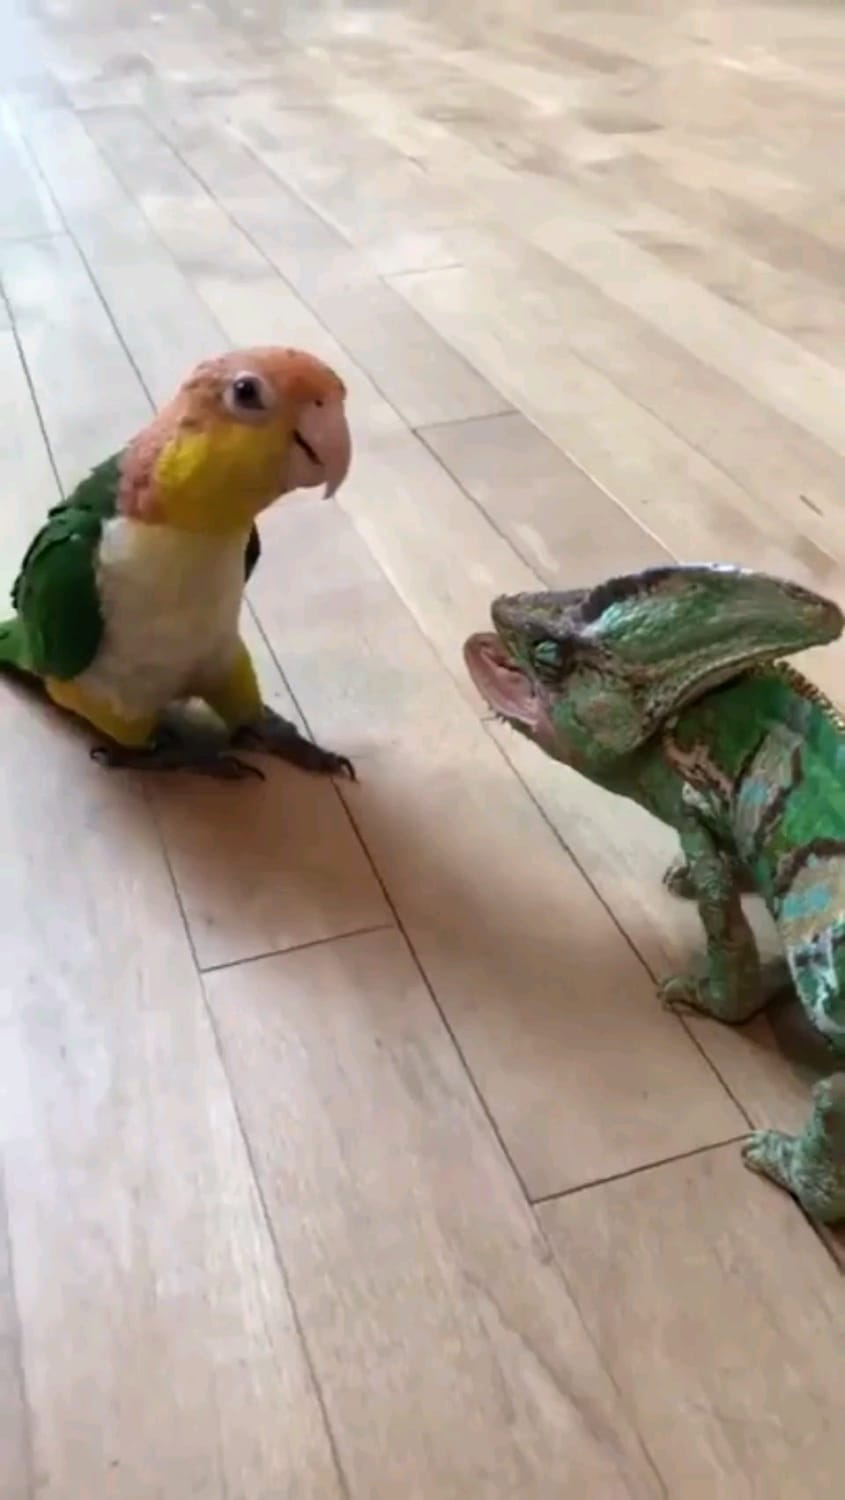 Two descendants of dinosaurs face off